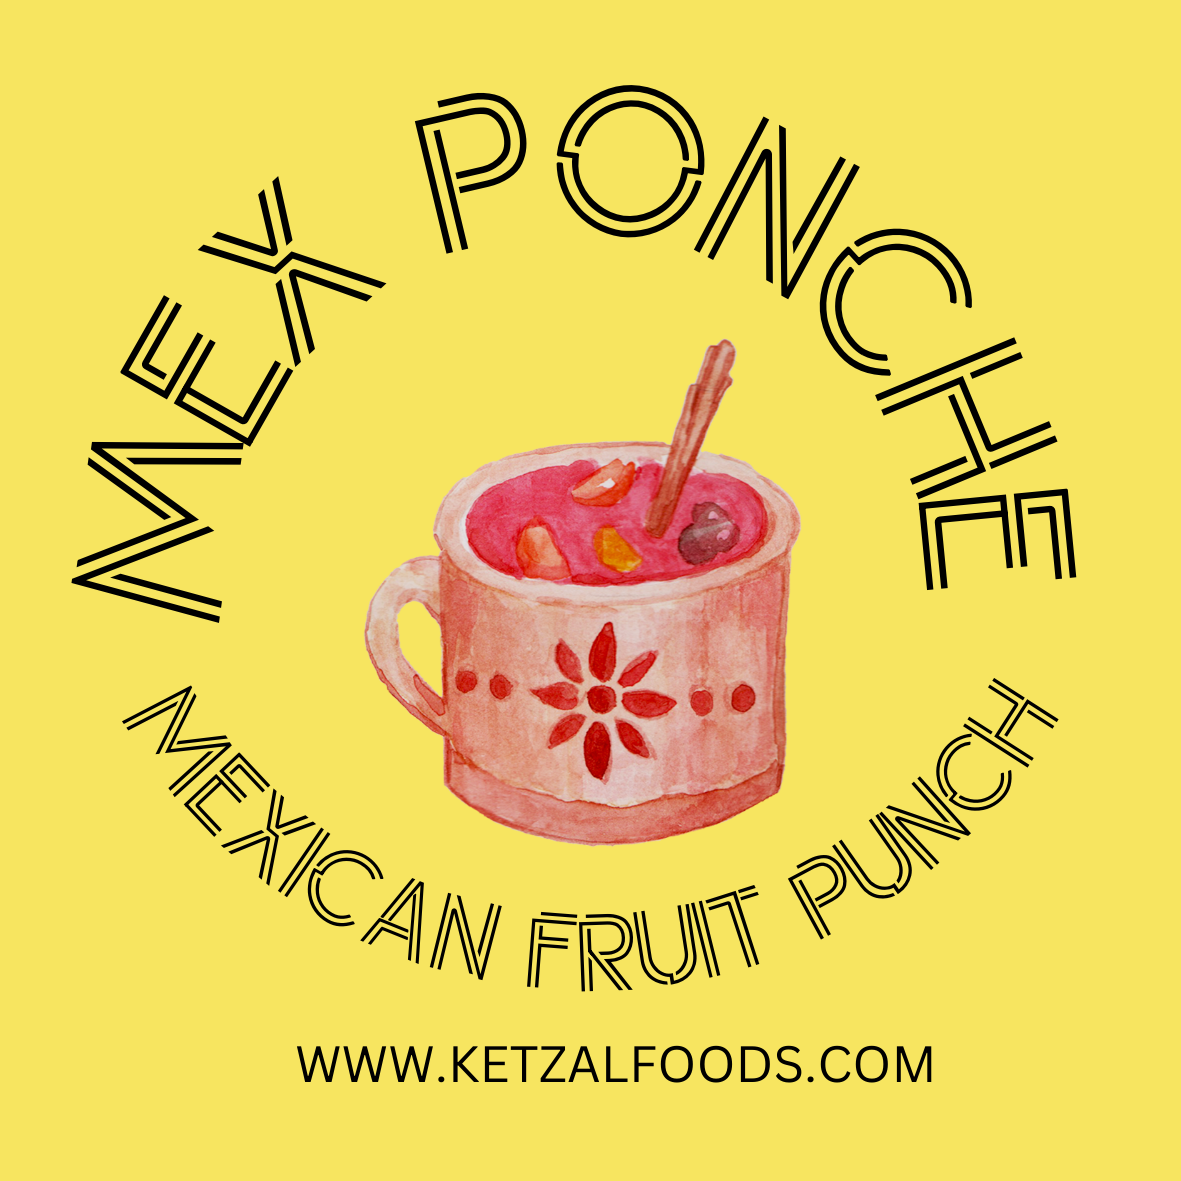 Mexican Ponche - Hot or cold fruit punch